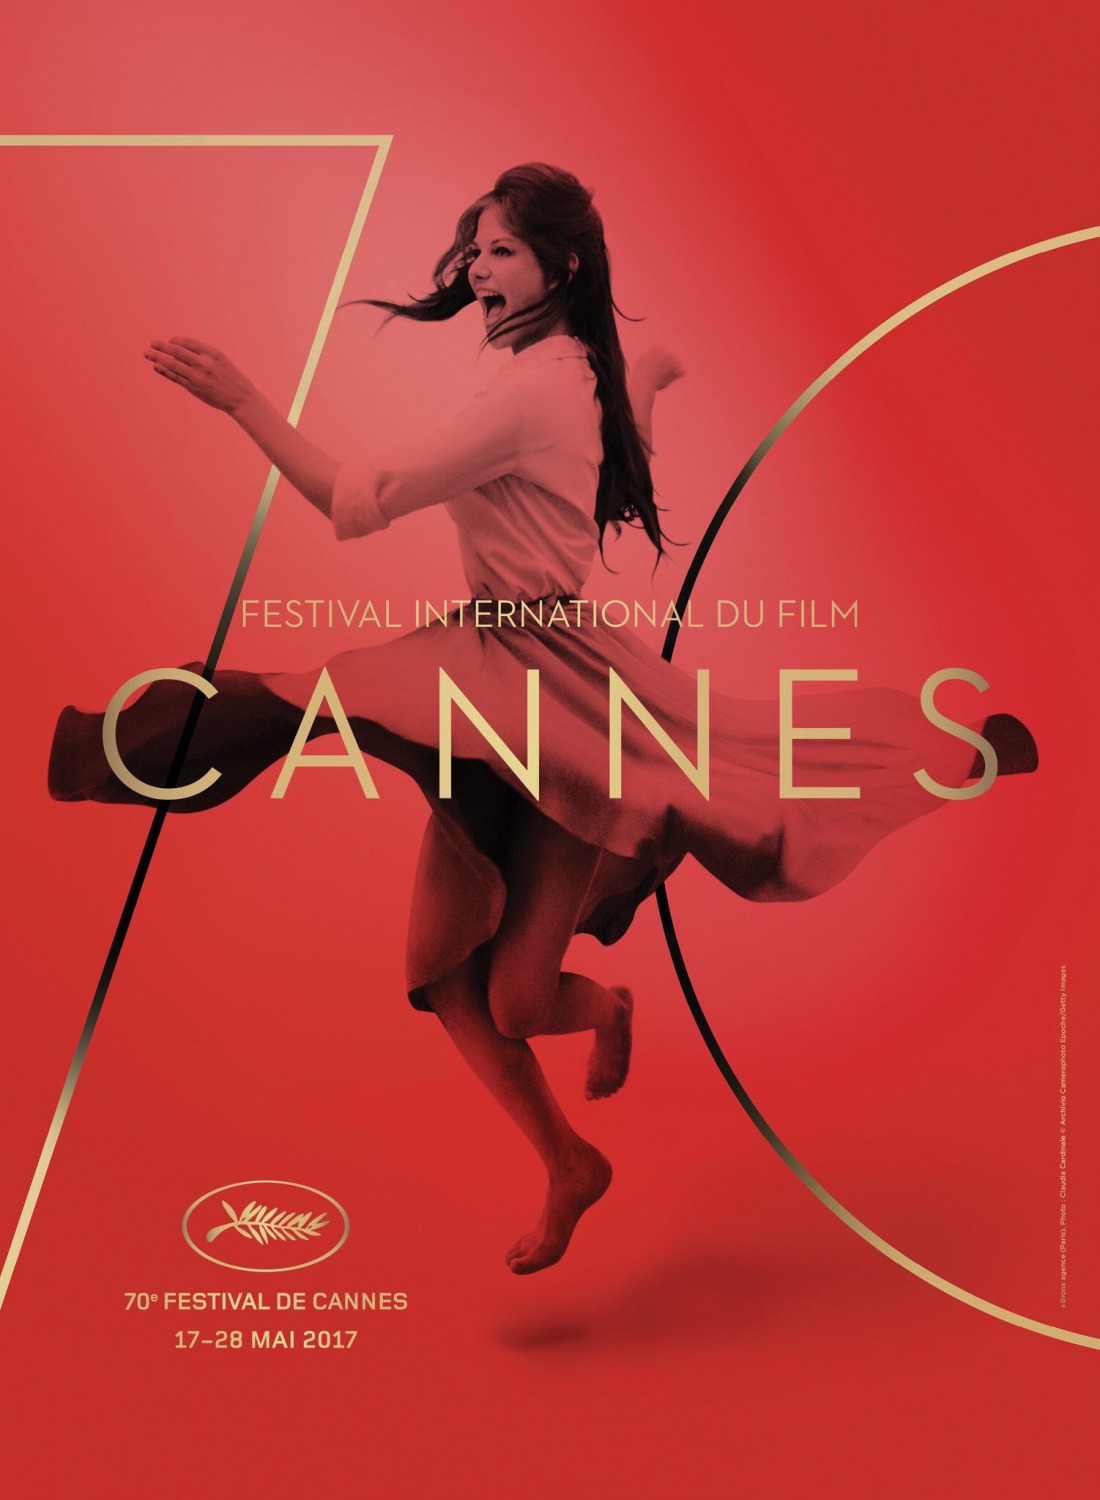 Cannes International Film Festival (7 of 8) Extra Large Movie Poster